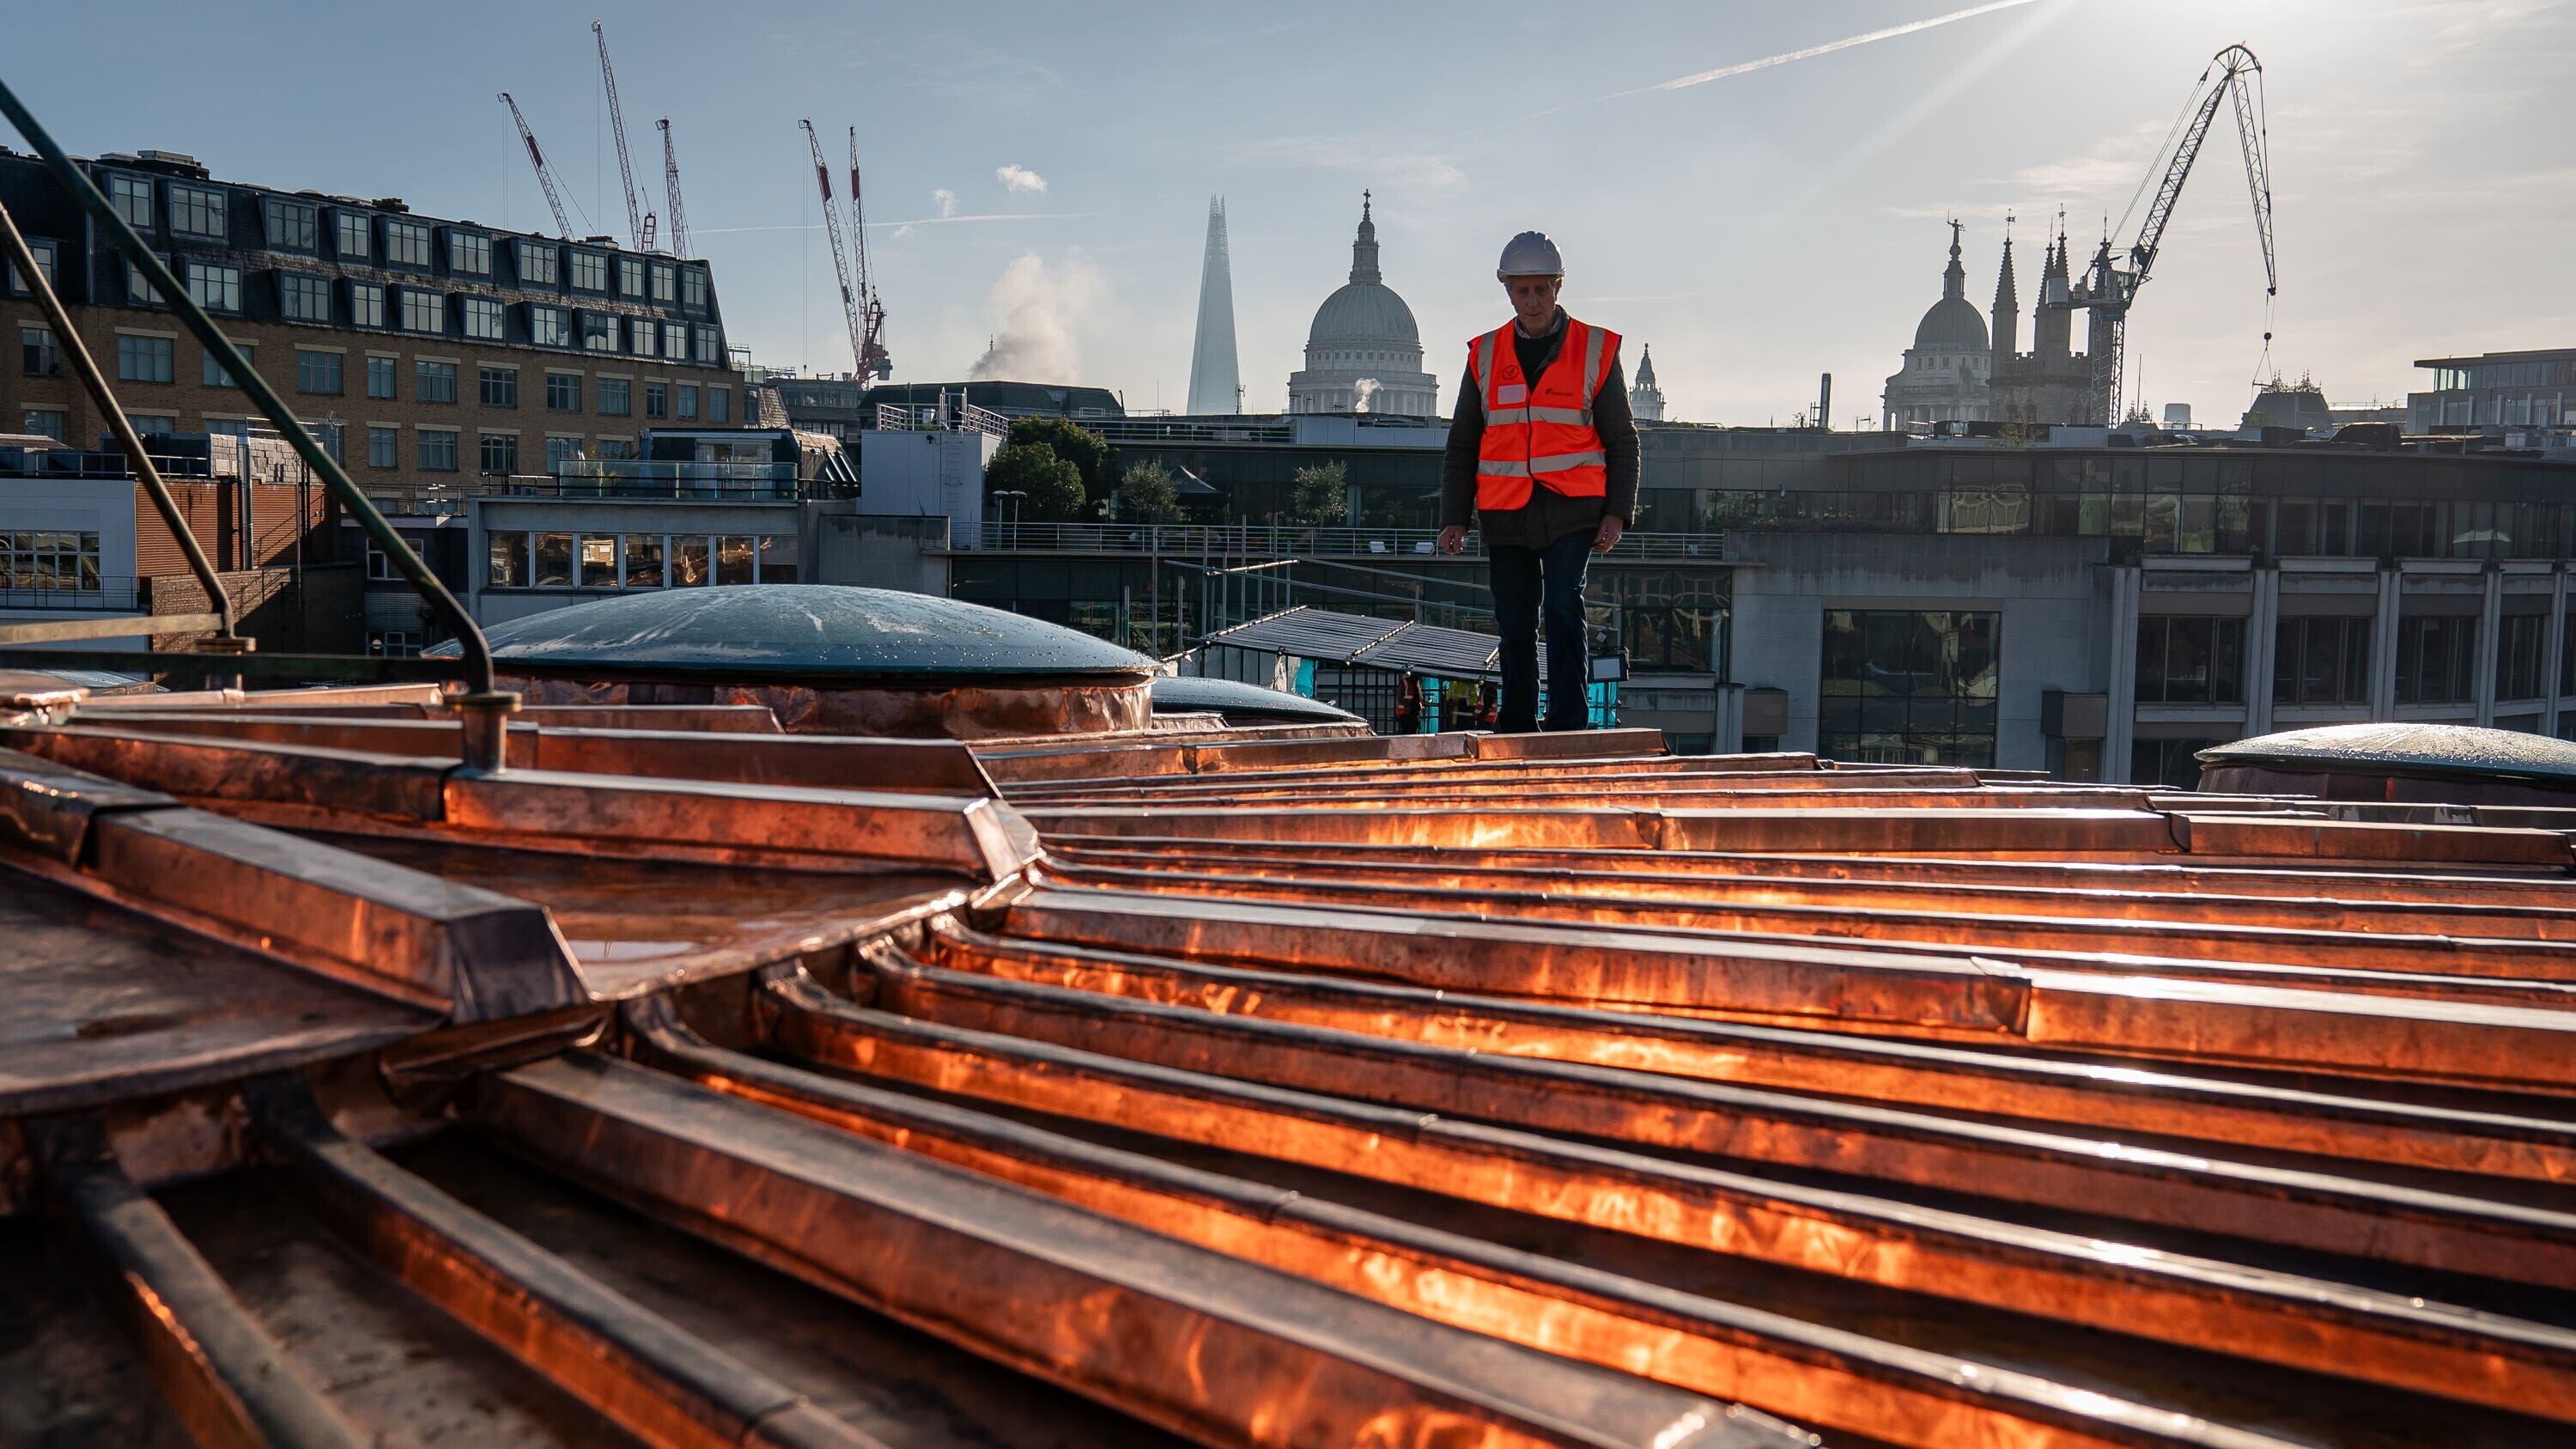 Chris Johnson, 82, who worked on the roof at Smithfield Market in London, as an apprentice in the 60s, walks across the refurbished copper clad Poultry Market roof, where the new Museum of London will be rehomed (Aaron Chown/PA)